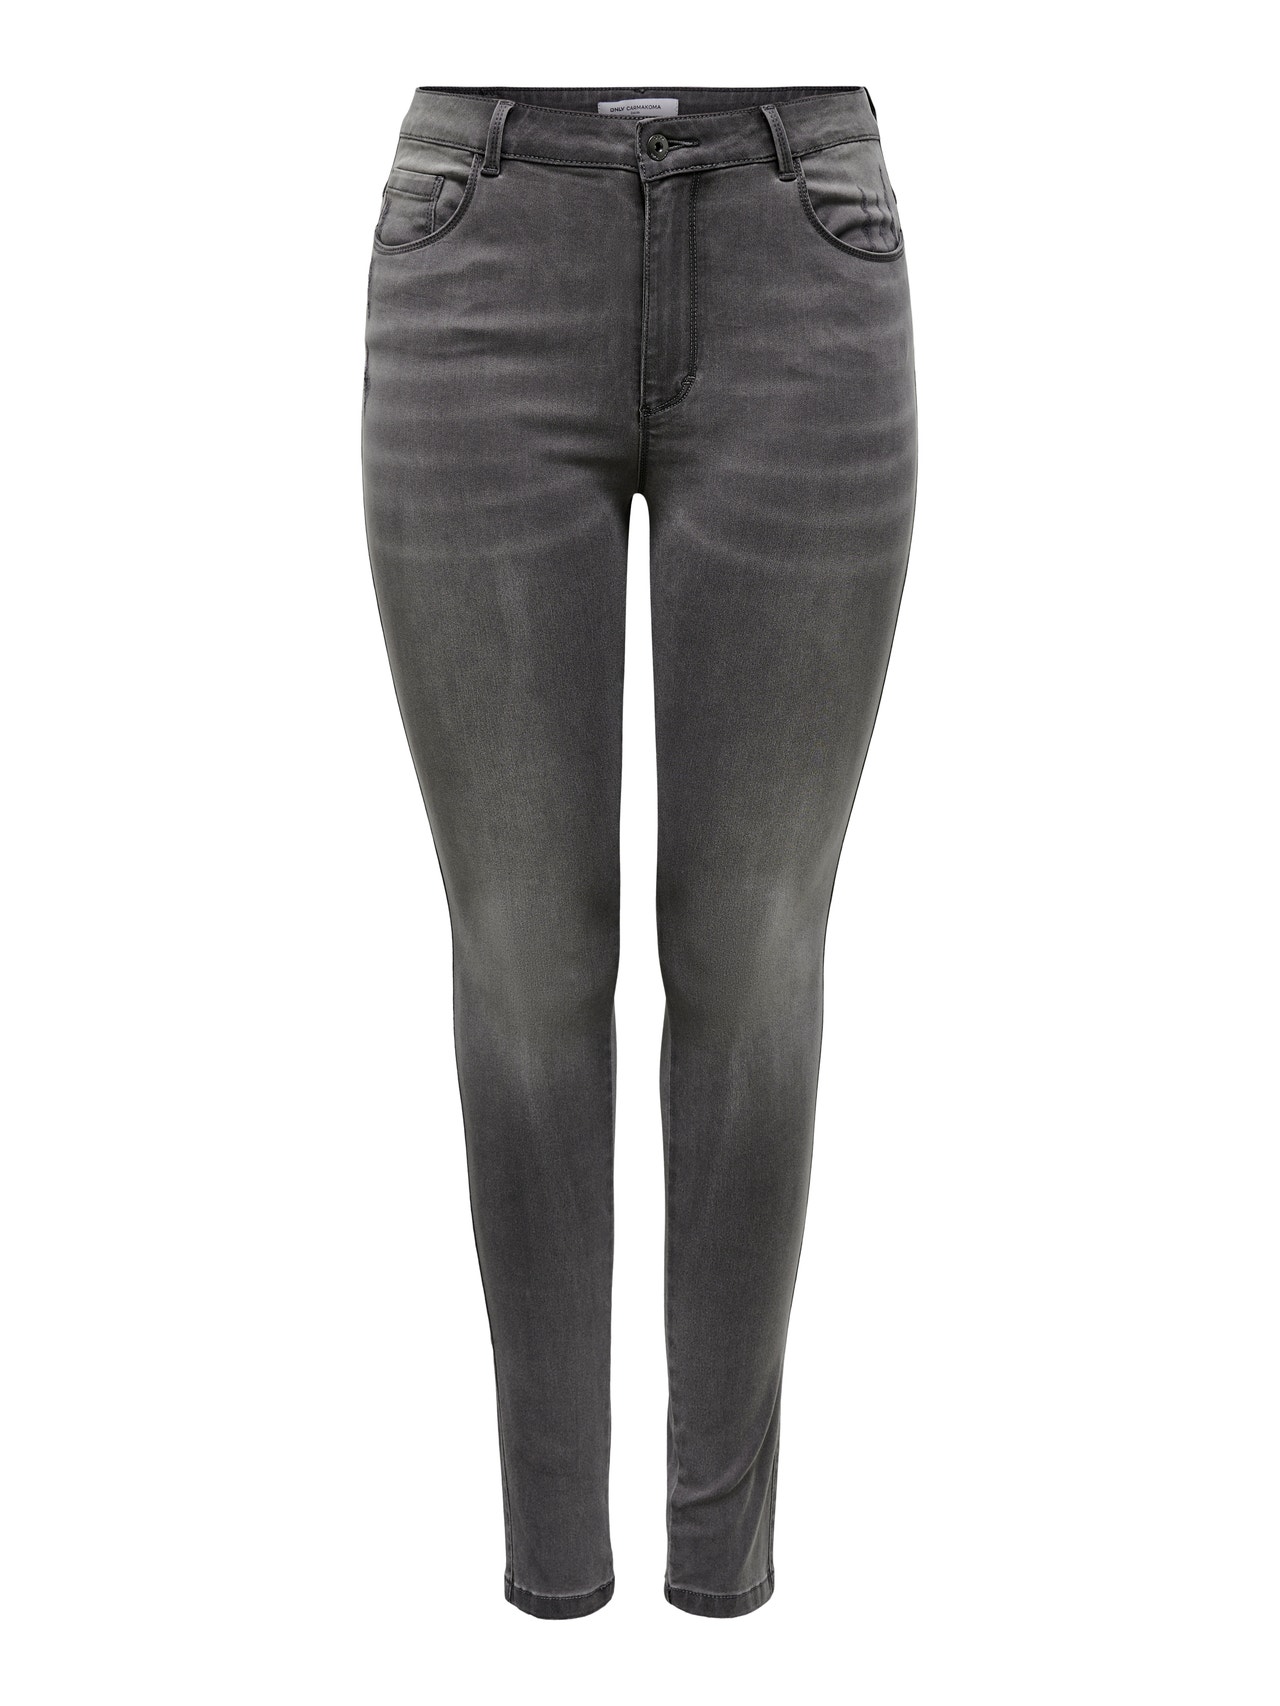 ONLY Skinny Fit Hohe Taille Jeans -Dark Grey Denim - 15212271